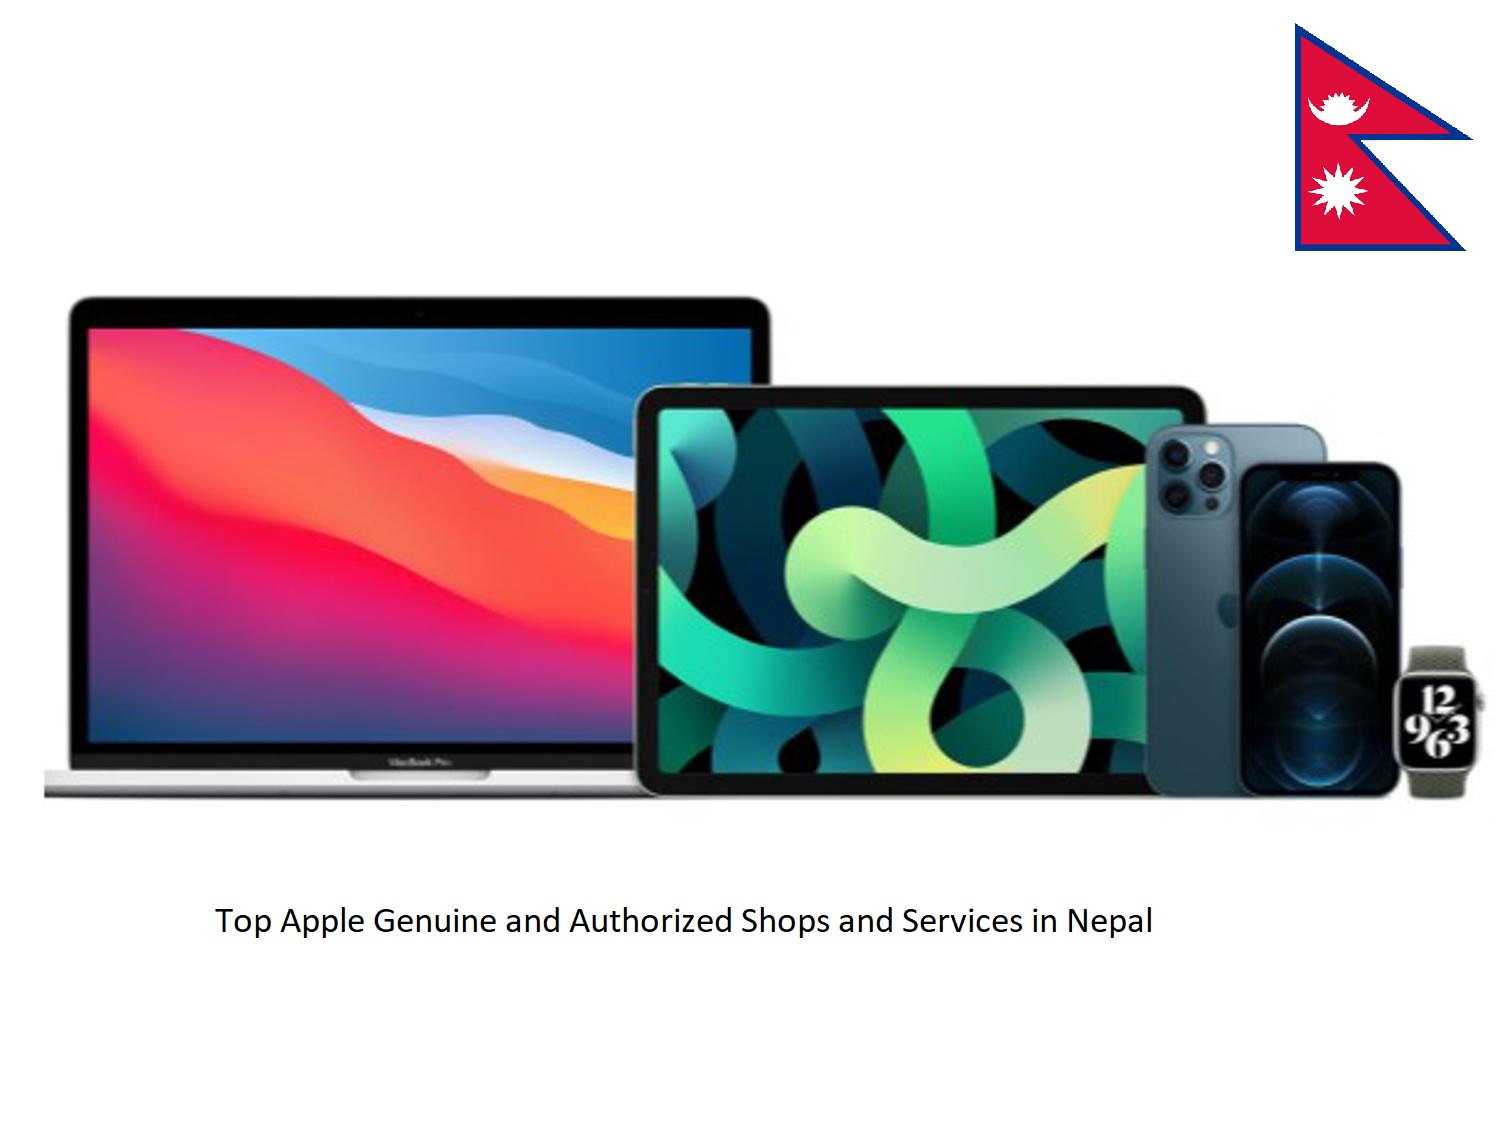 Top Apple Genuine and Authorized Shops and Services in Nepal